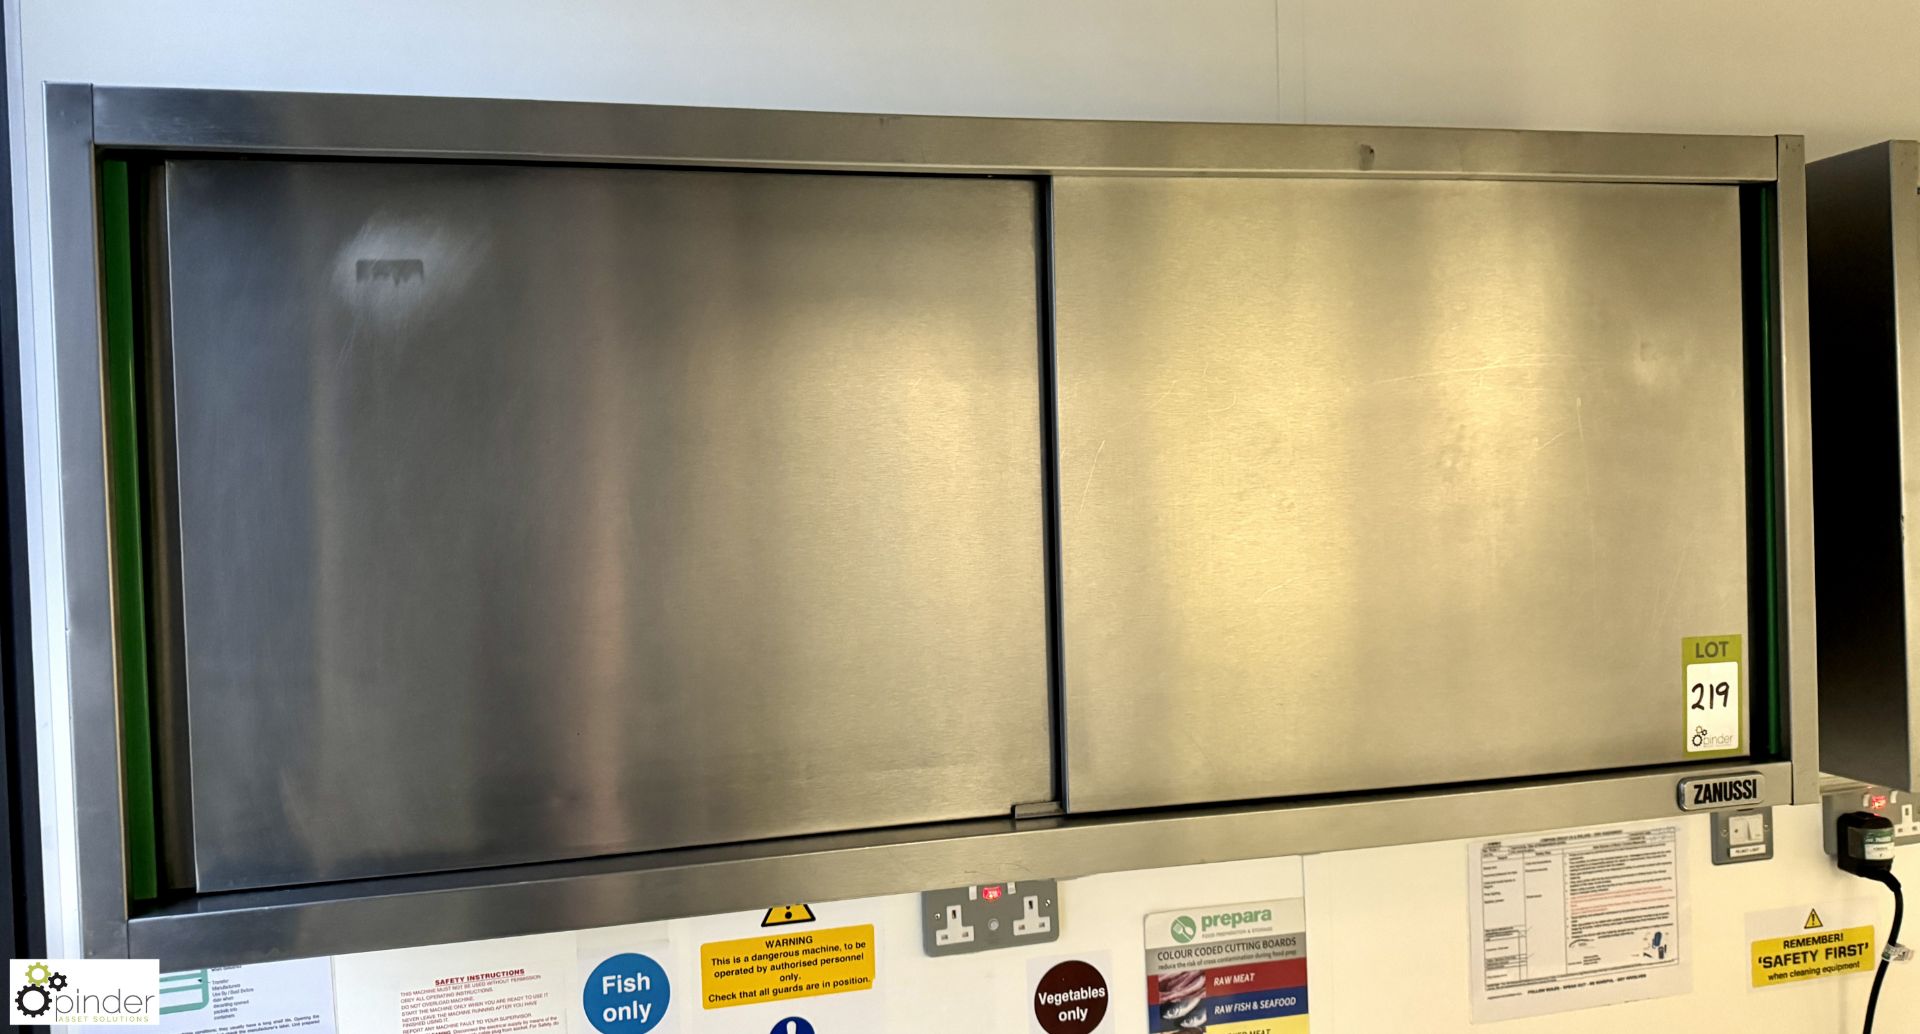 Zanussi stainless steel wall mounted double door Cabinet, 1400mm x 380mm x 600mm (location in